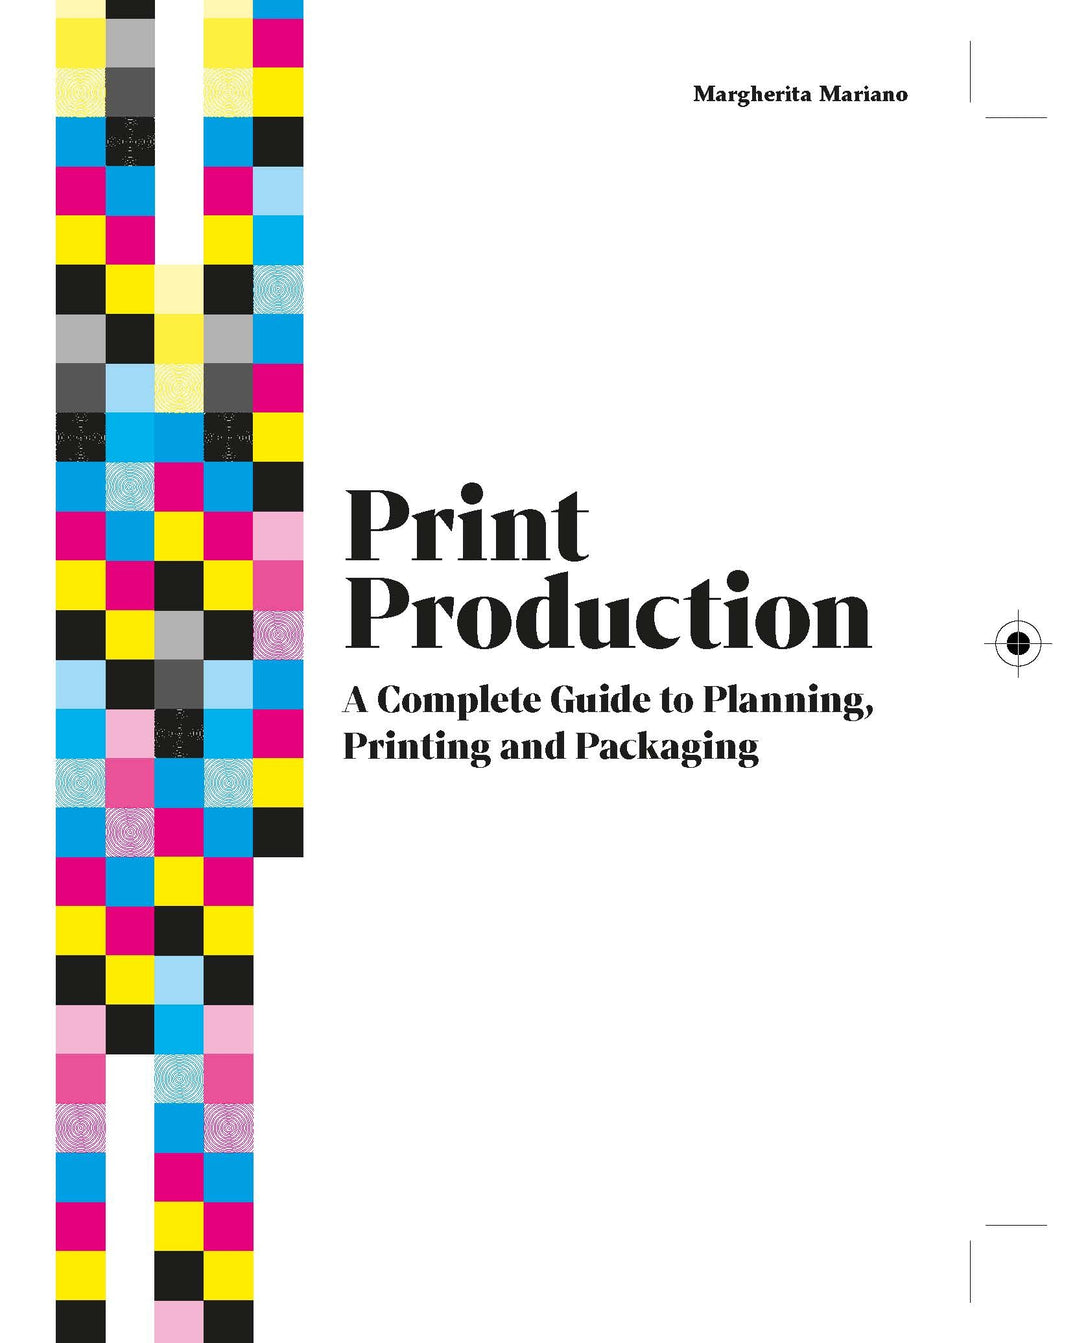 Print Production by Andrea Reece, Margherita Mariano